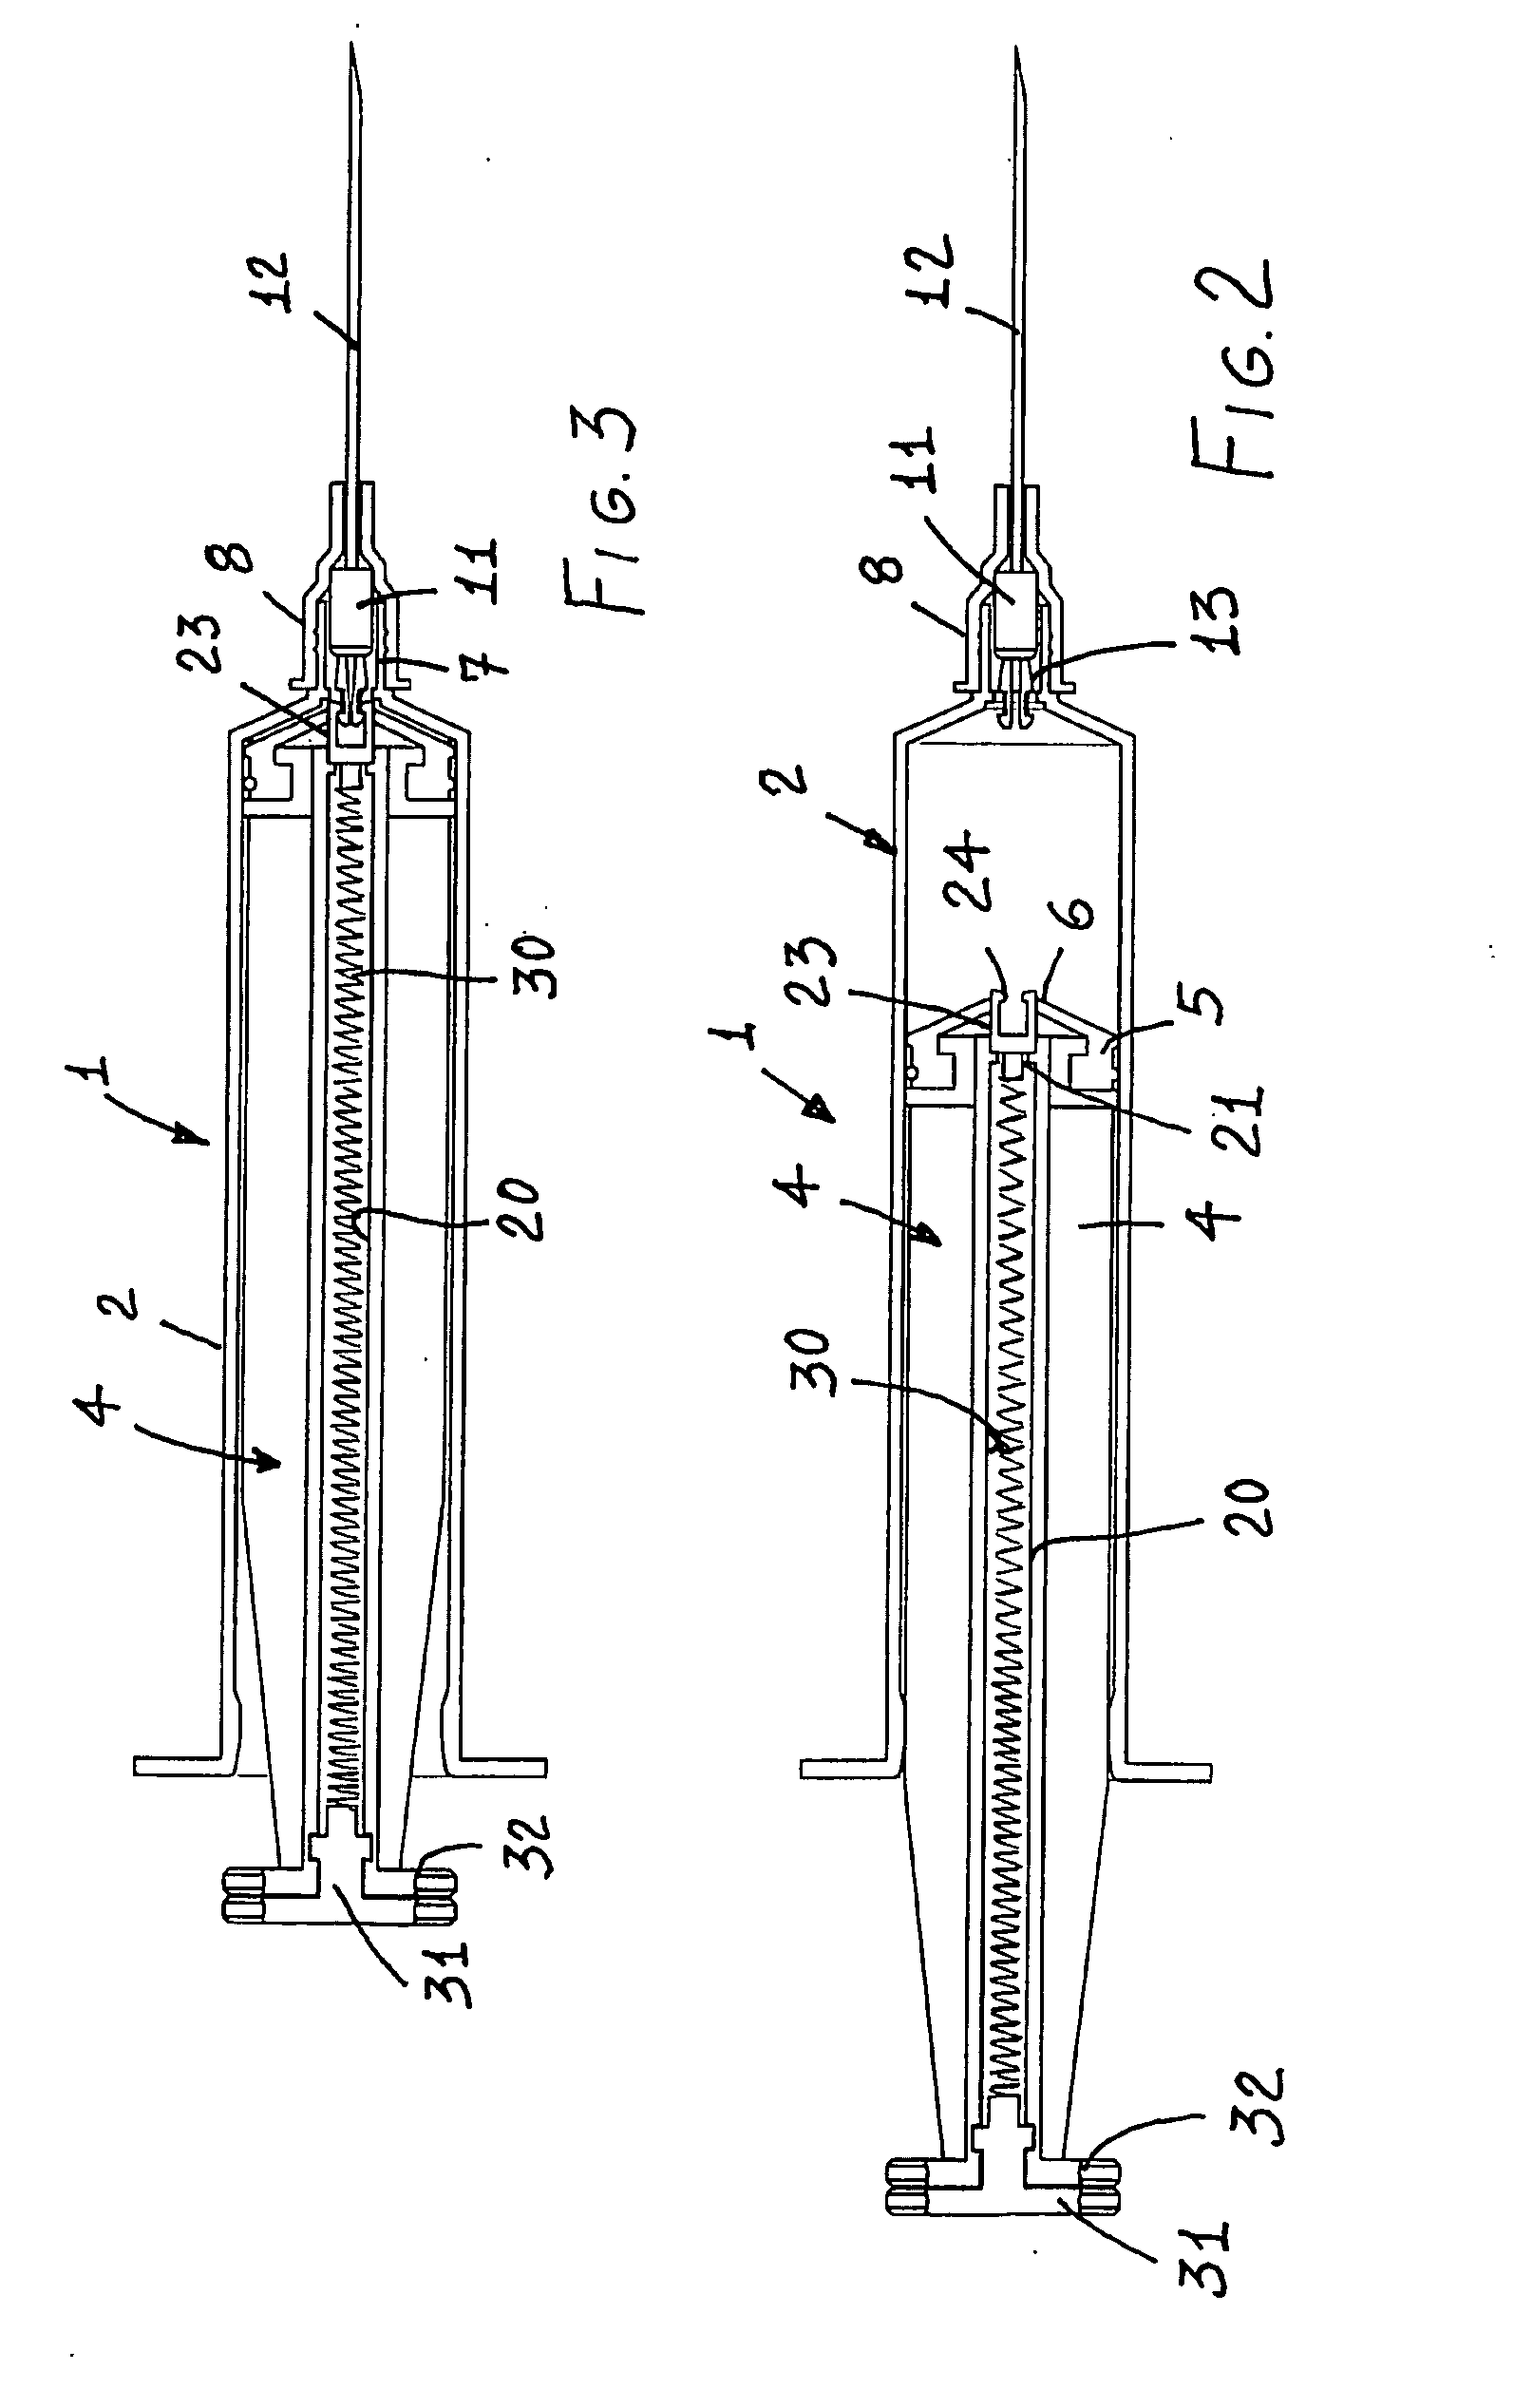 Disposable safety syringe including an automatically retractable needle